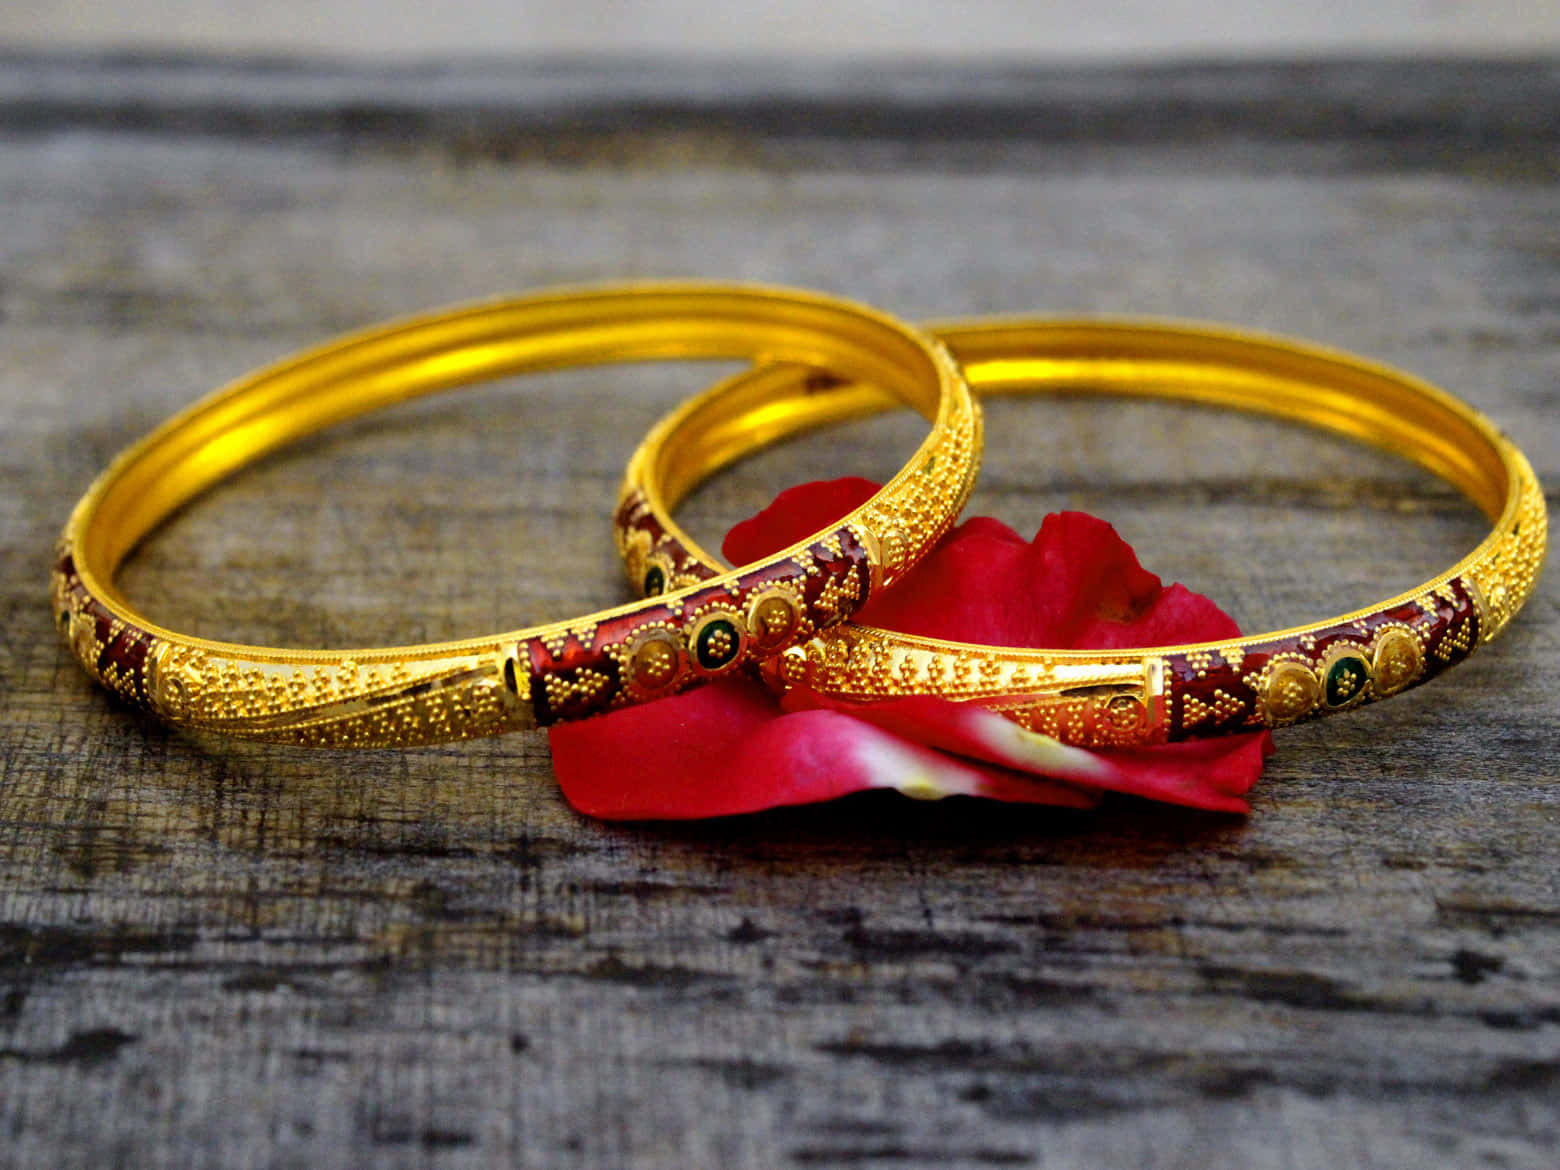 Enjoy colorfully adorning your wrists with beautiful bangles